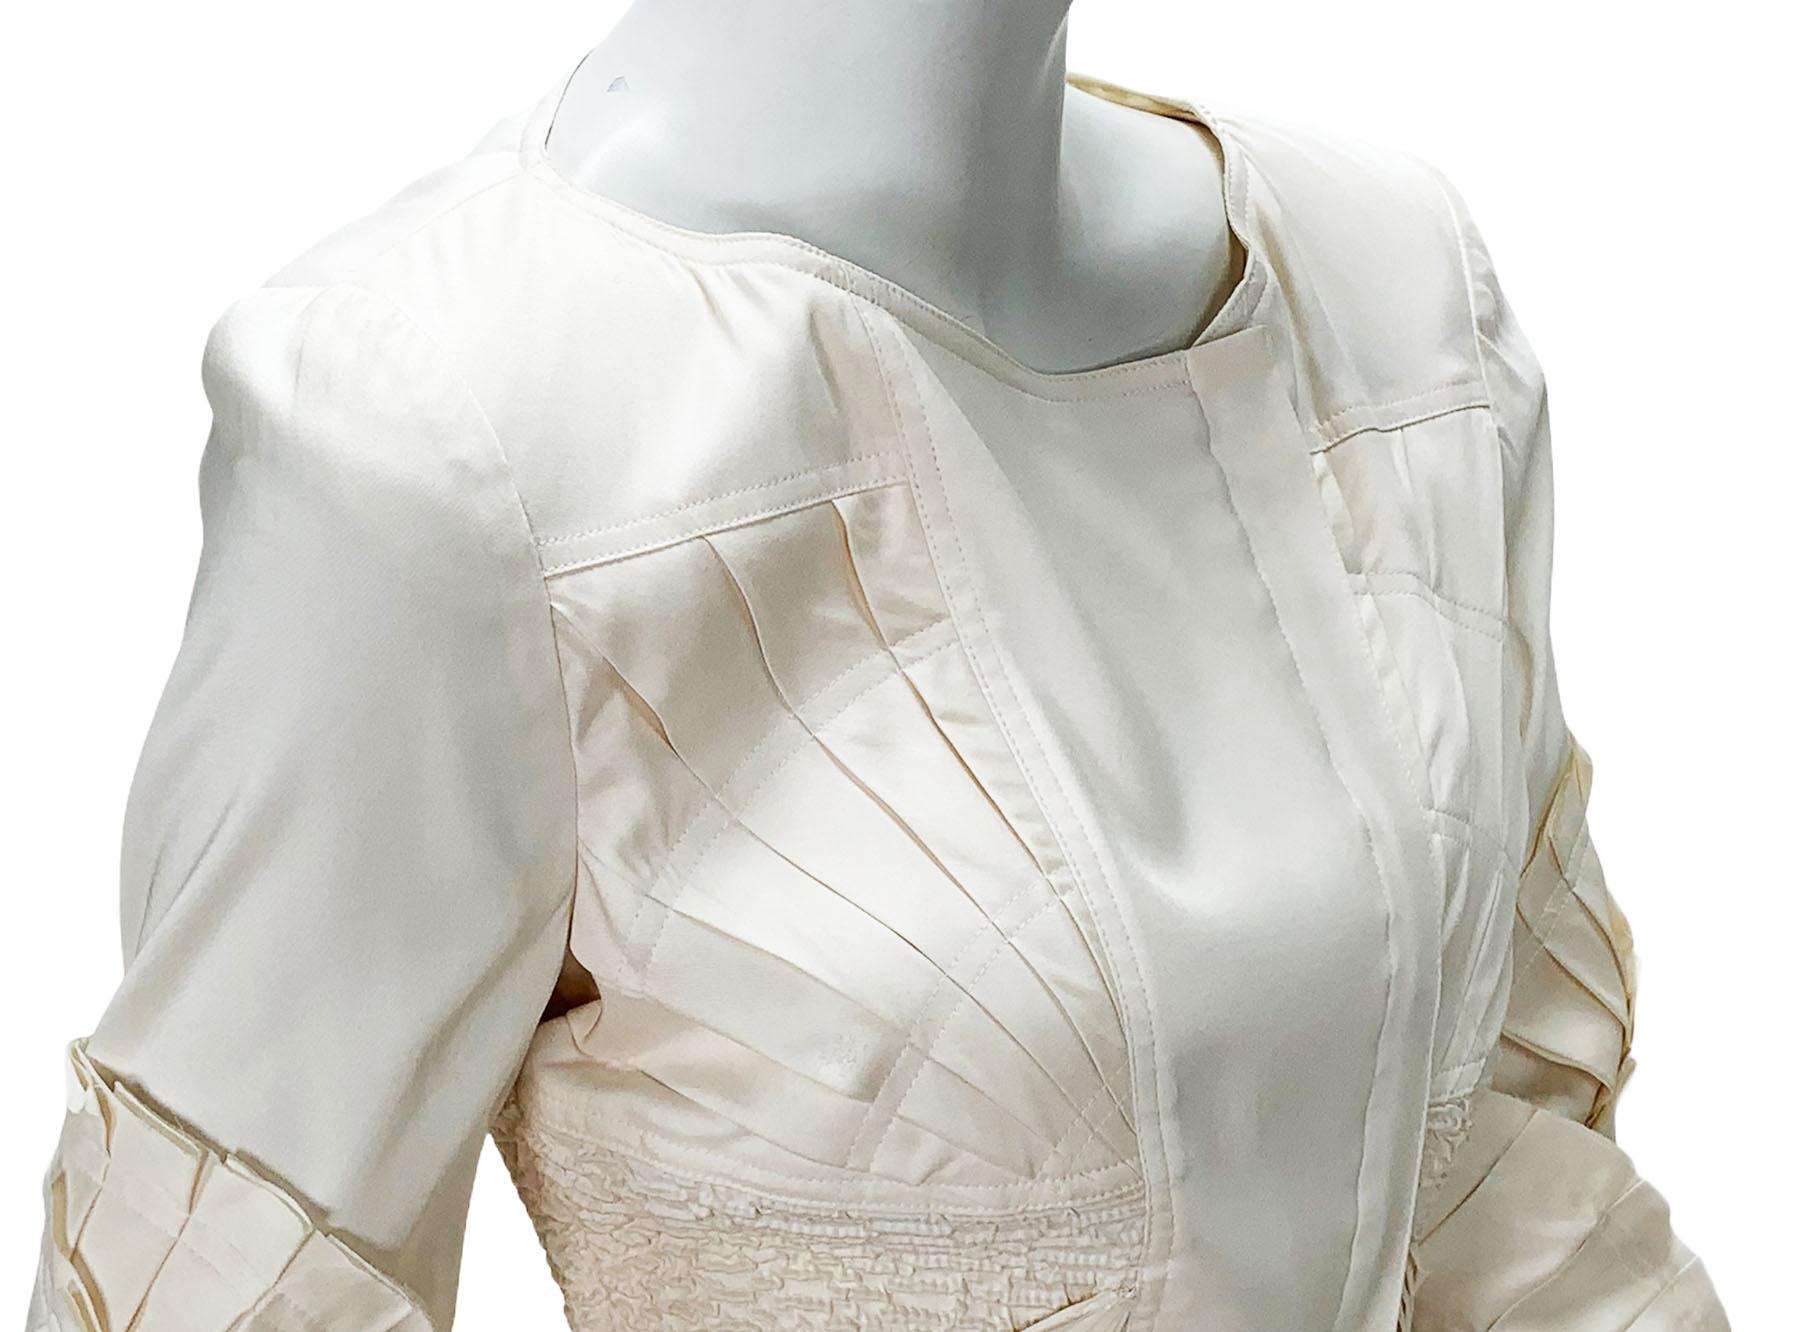 Tom Ford for Gucci S/S 2004 Silk Off-White Color Fan Pleated Jacket It 40 - US 4 For Sale 4